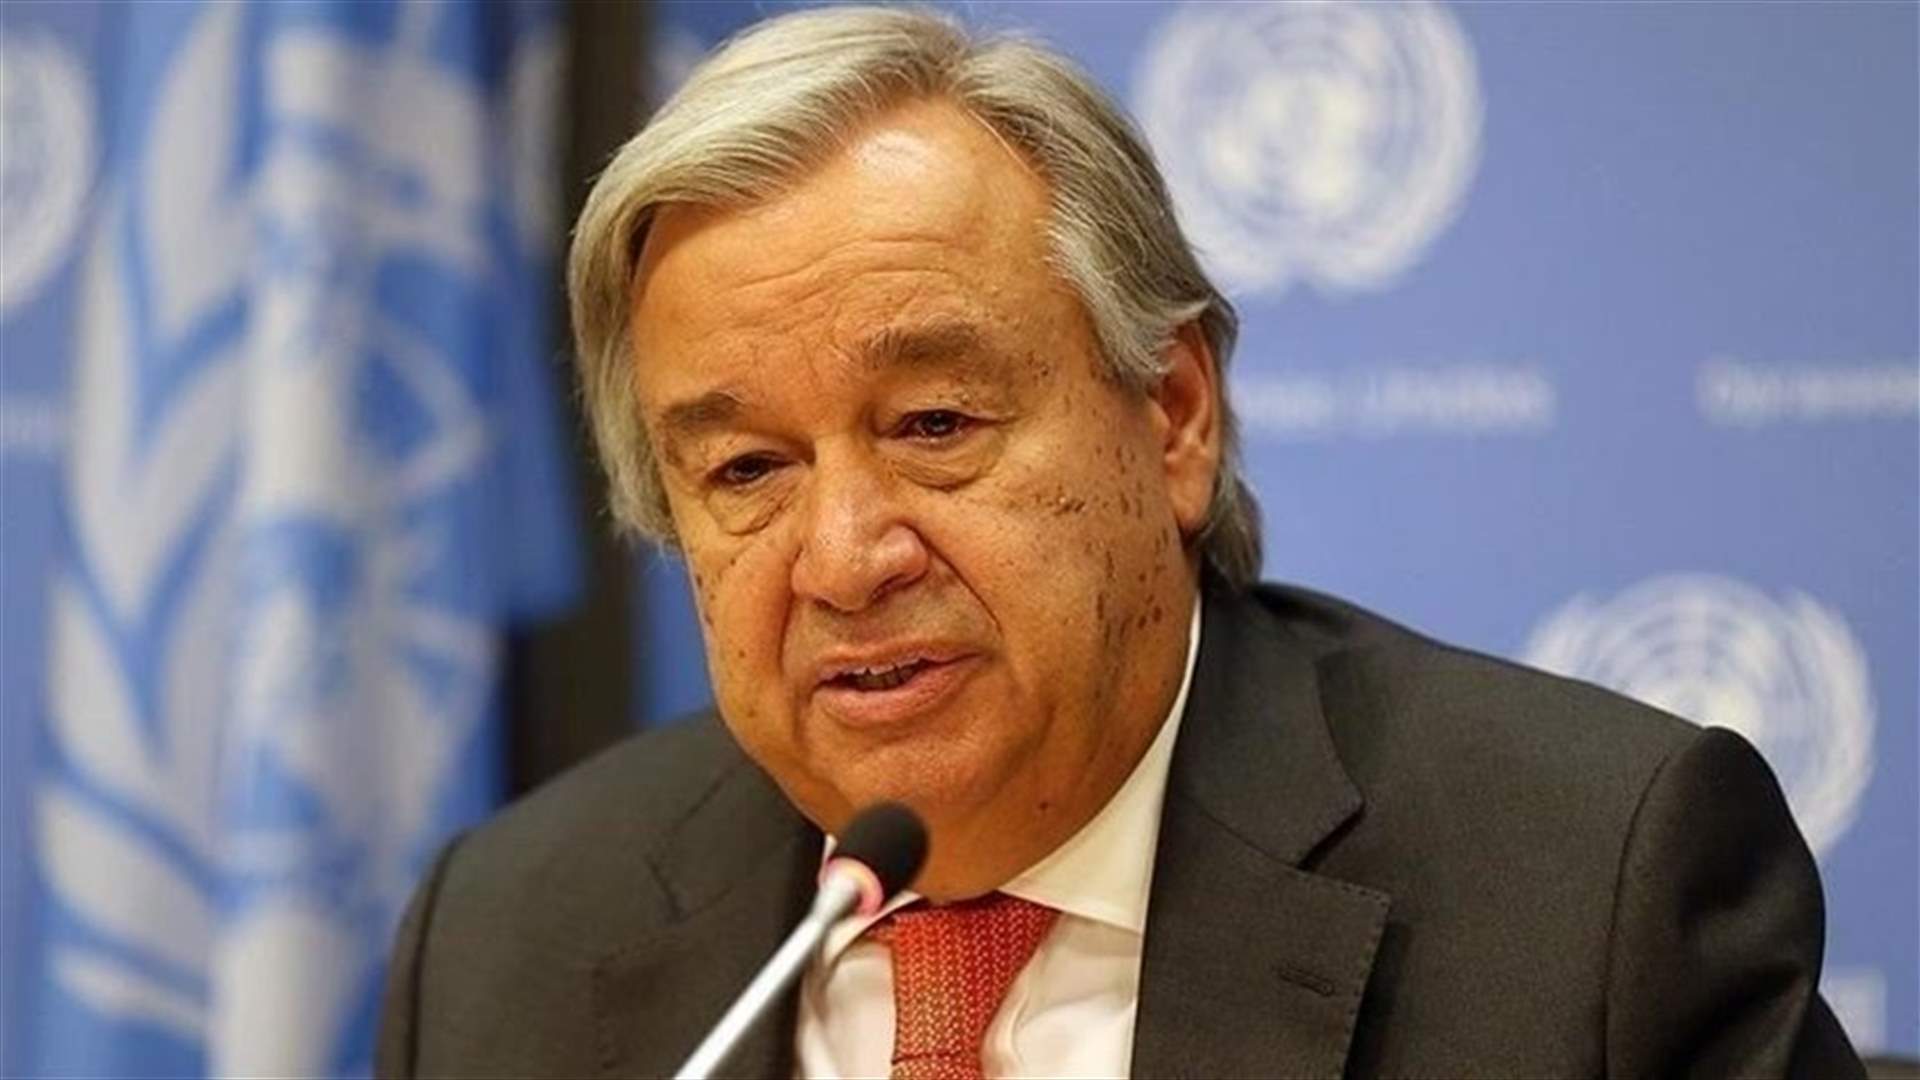 Guterres: Only by coming together will world be able to face down covid-19 pandemic